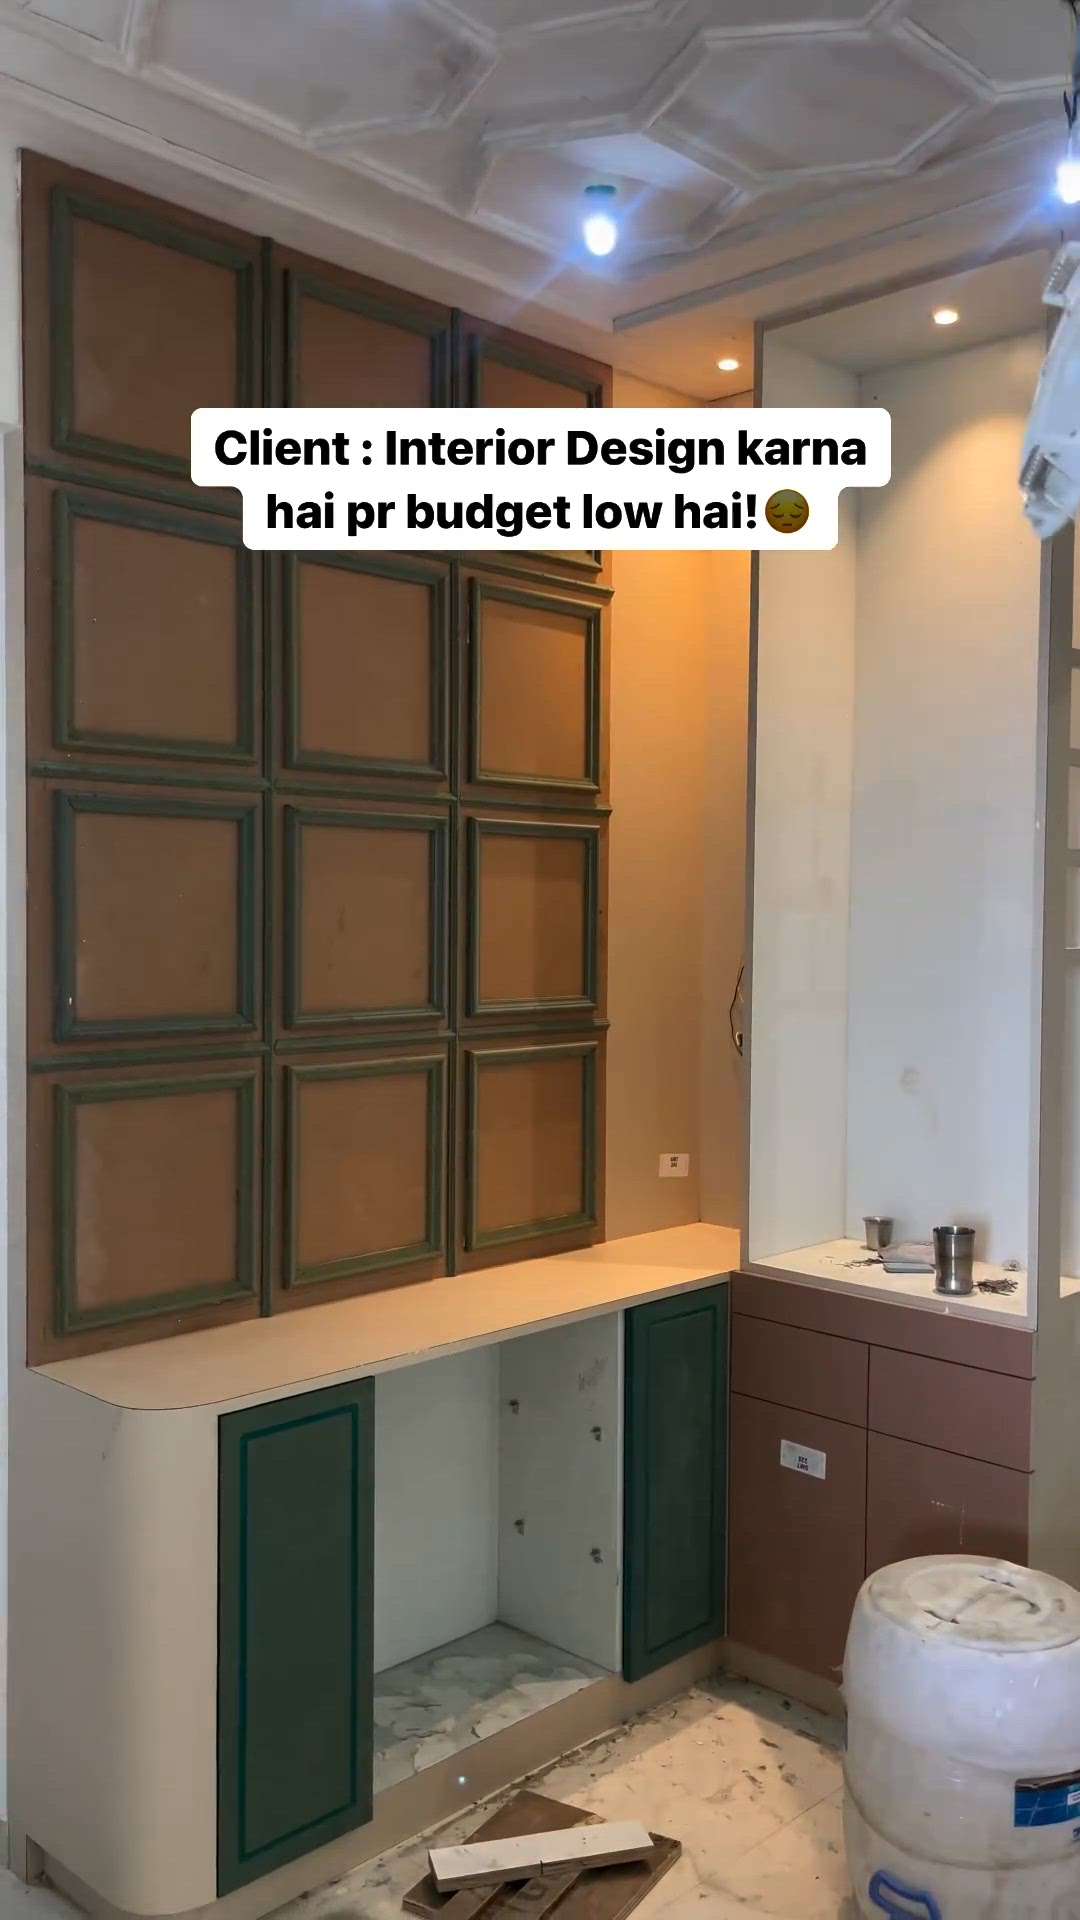 (Contact - 8882208682) 
Looking for one-stop interior design solutions for your dream home or office? 😍
At Stunning decor, we don't just build homes but craft your desires into fresh designs to make you fall in love with your home! ✨
Get your dream home designed by us 💫furniture
📩 Comment or DM ' smart ' to order
📞Contact - 8882208682
💻 https://stunningdecor..com
Follow 👉@stunningdecor
Follow👉 @stunningdecor
Follow👉 @stunninhdecor
➖➖➖➖➖➖➖➖
#interiordesign #designinterior #interiordesigner #designdeinteriores #interiordesignideas #interiordesigners #designerdeinteriores #interiordesigns #interiordesigninspiration
.
.
.
#memeindian
#memesociety
#indianjoke
#desitrolls
#idioticsperm
#interiordesign #designinterior #interiordesigner #designdeinteriores #interiordesignideas #interiordesigners #designerdeinteriores #interiordesigns #interiordesigninspiration #interioresdesign #designdeinterior #interiorsdesign #designerinteriors